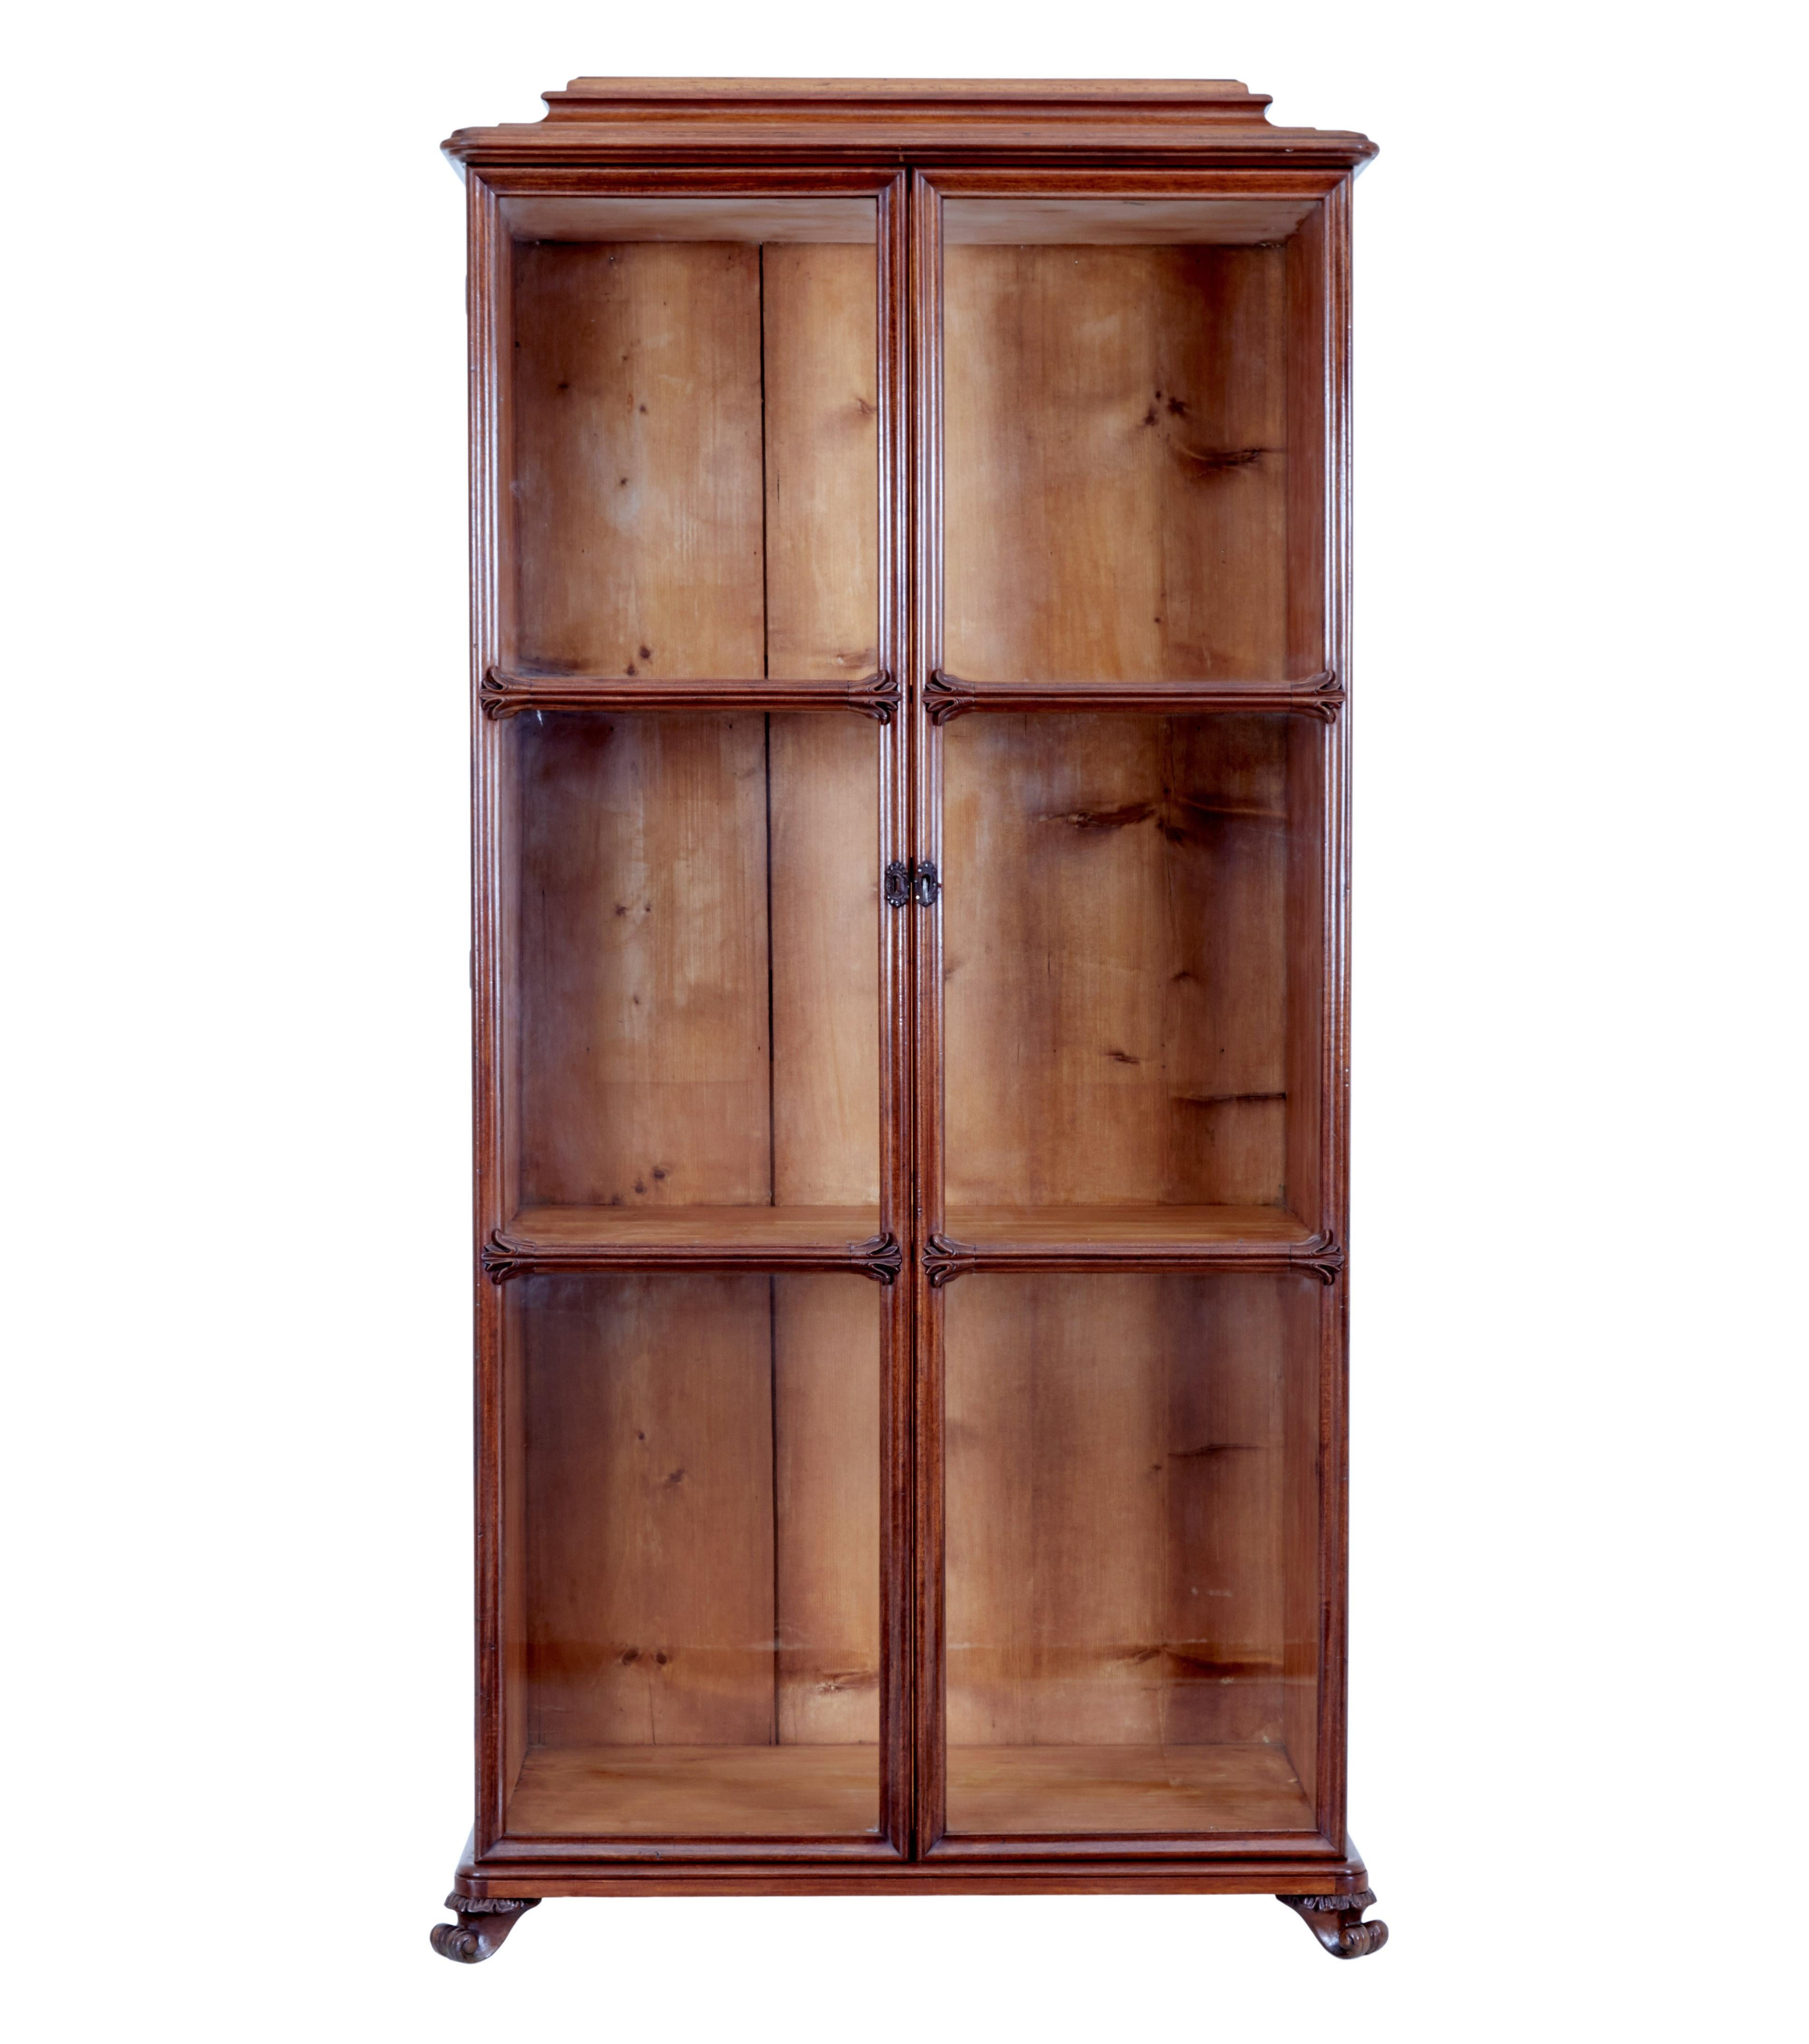 Danish mid 19th century mahogany glazed display cabinet circa 1860.

Good quality Danish piece of furniture with strong earlier 19th century english and french influences.

Caddy top, which sits above the double glazed doors, each with 3 panels